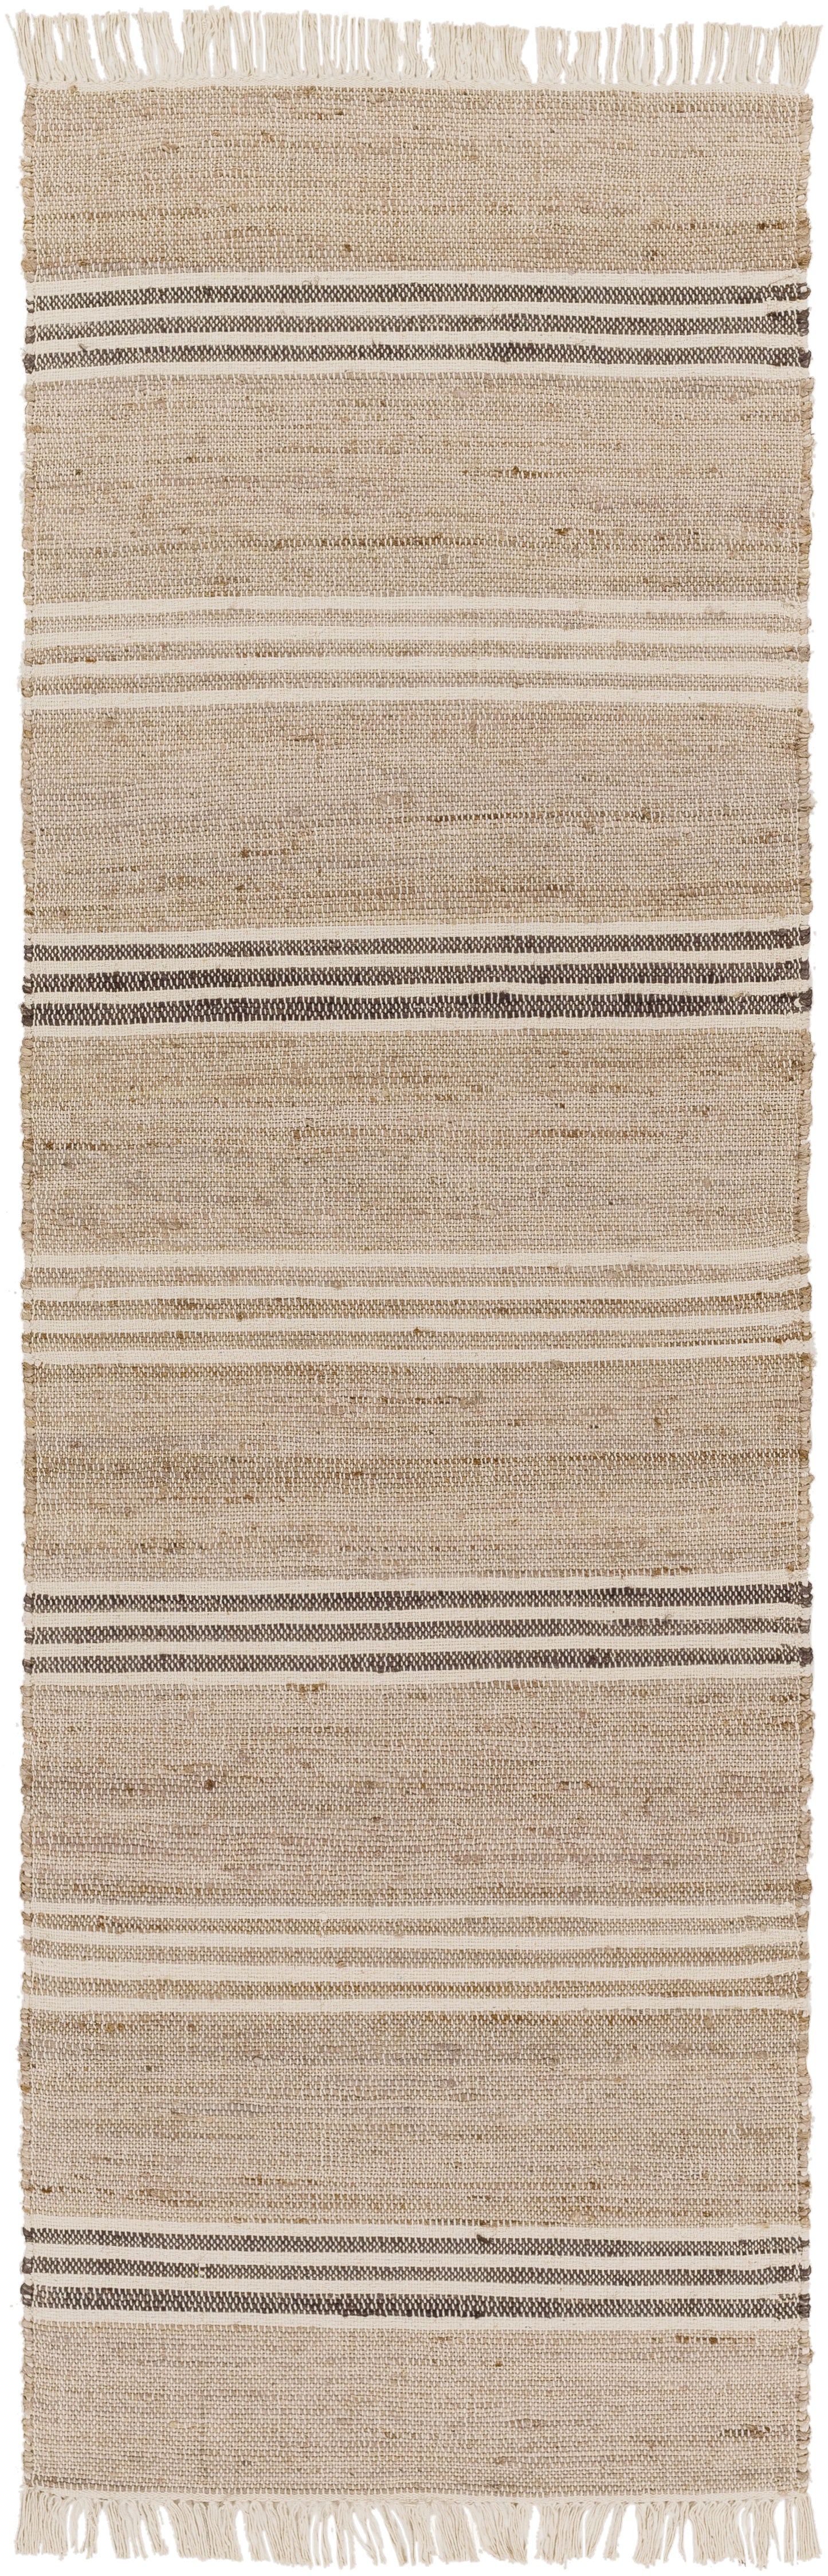 Trabzon 30337 Hand Woven Jute Indoor Area Rug by Surya Rugs